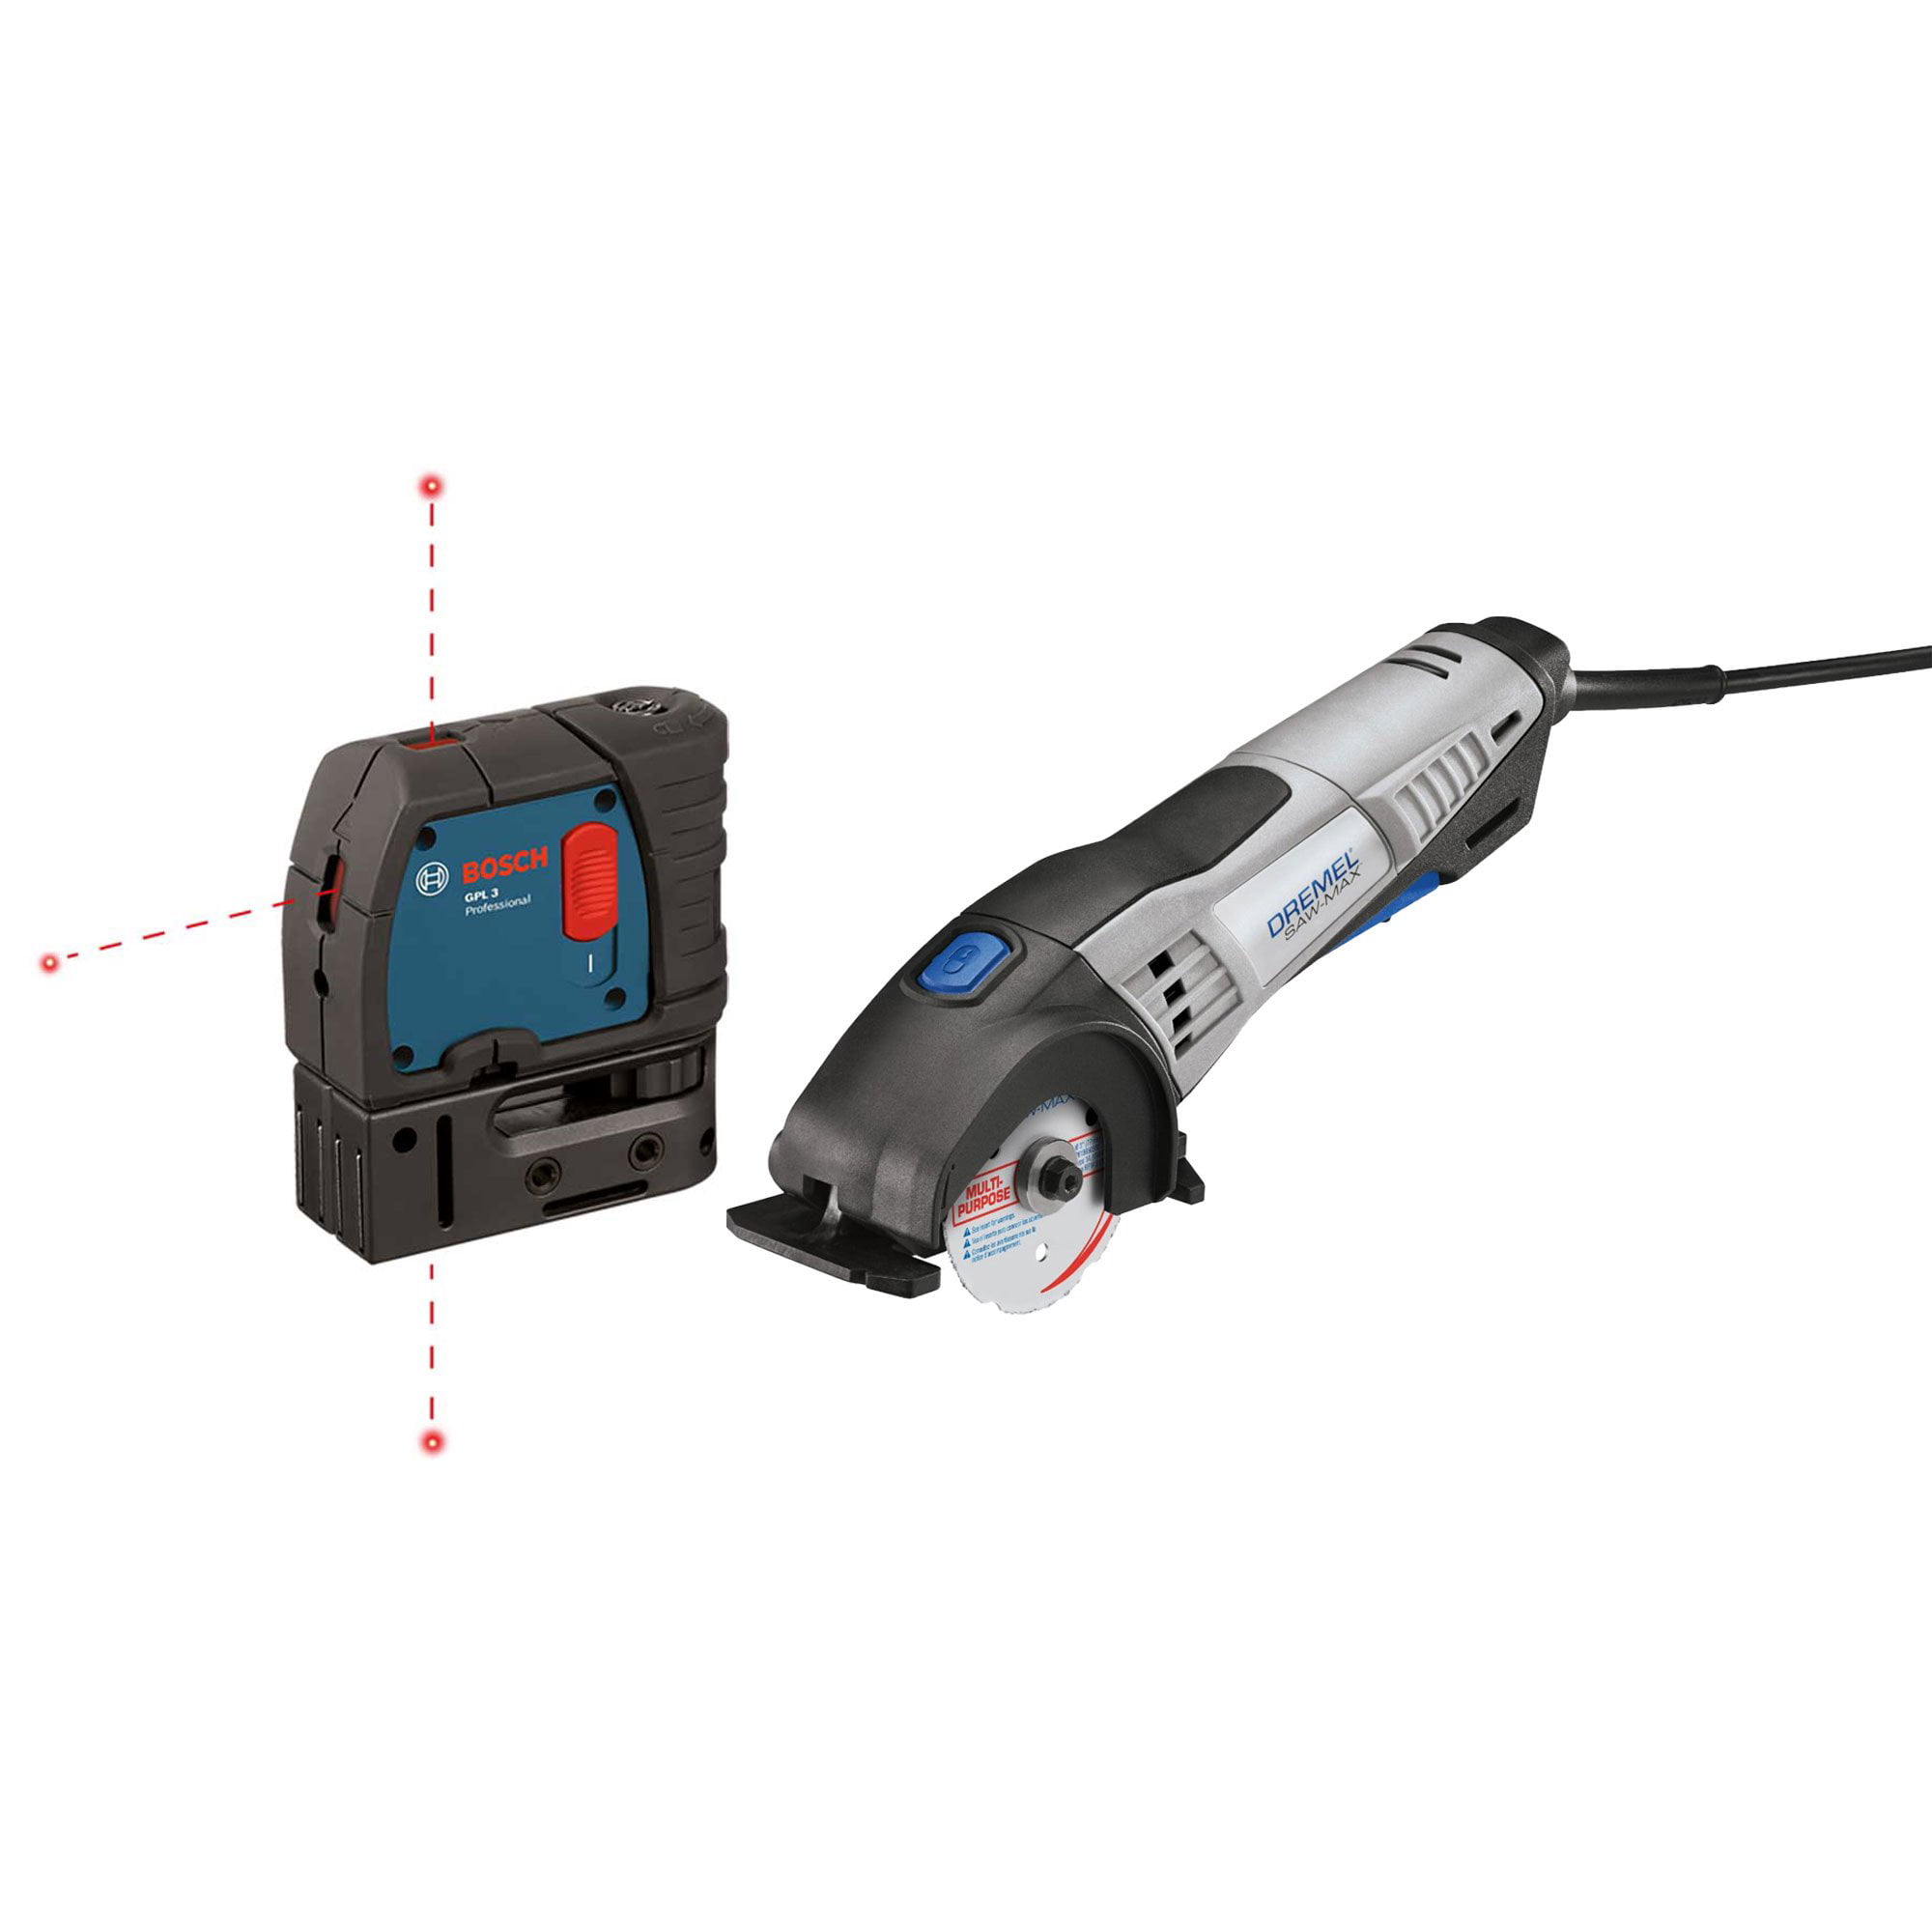 Bosch GPL3 3 Point Self Leveling Alignment Laser Level Certified Refurbished 